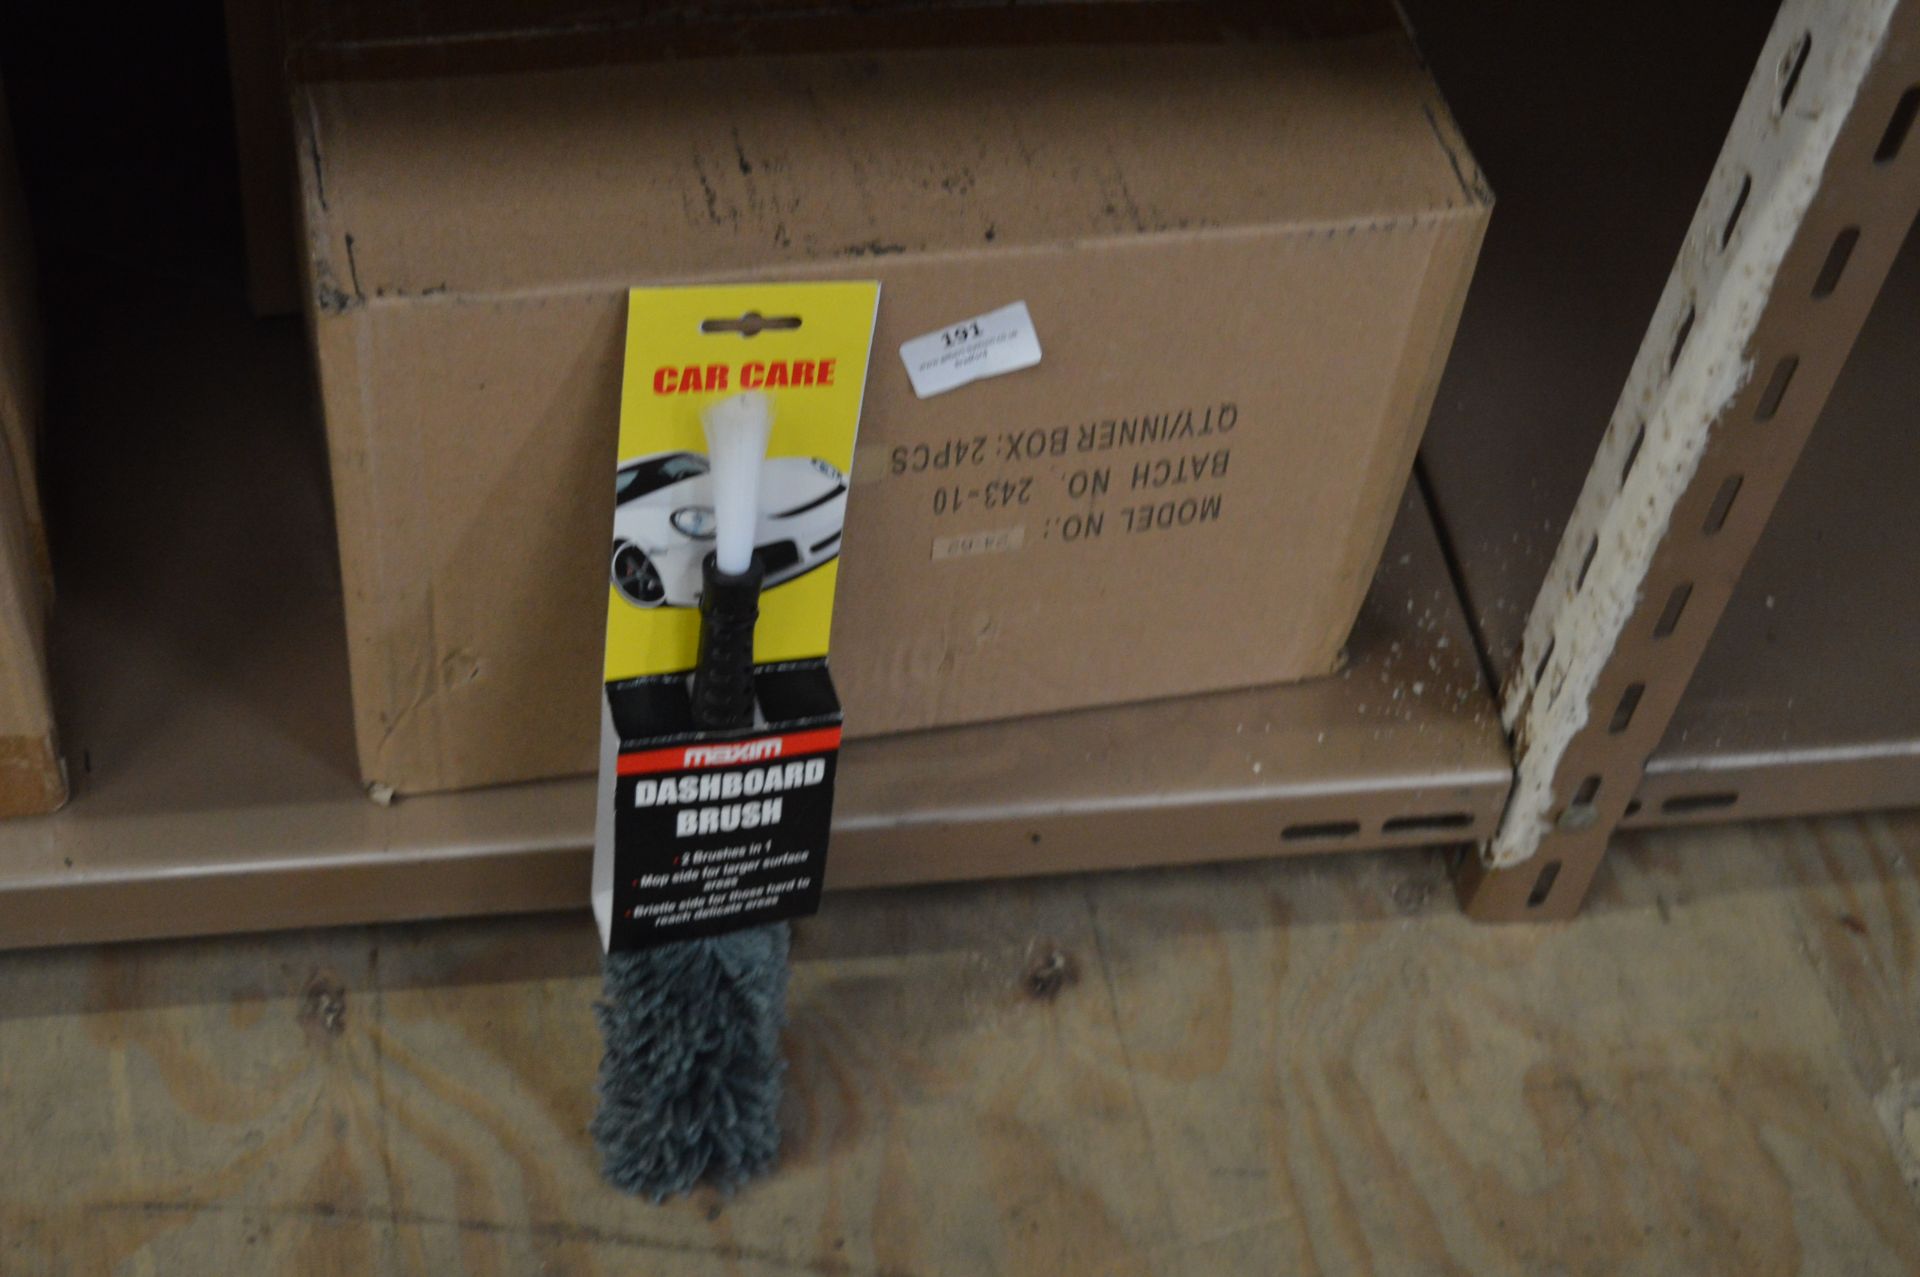 *Two Boxes Containing 24 Car Detailing Brushes